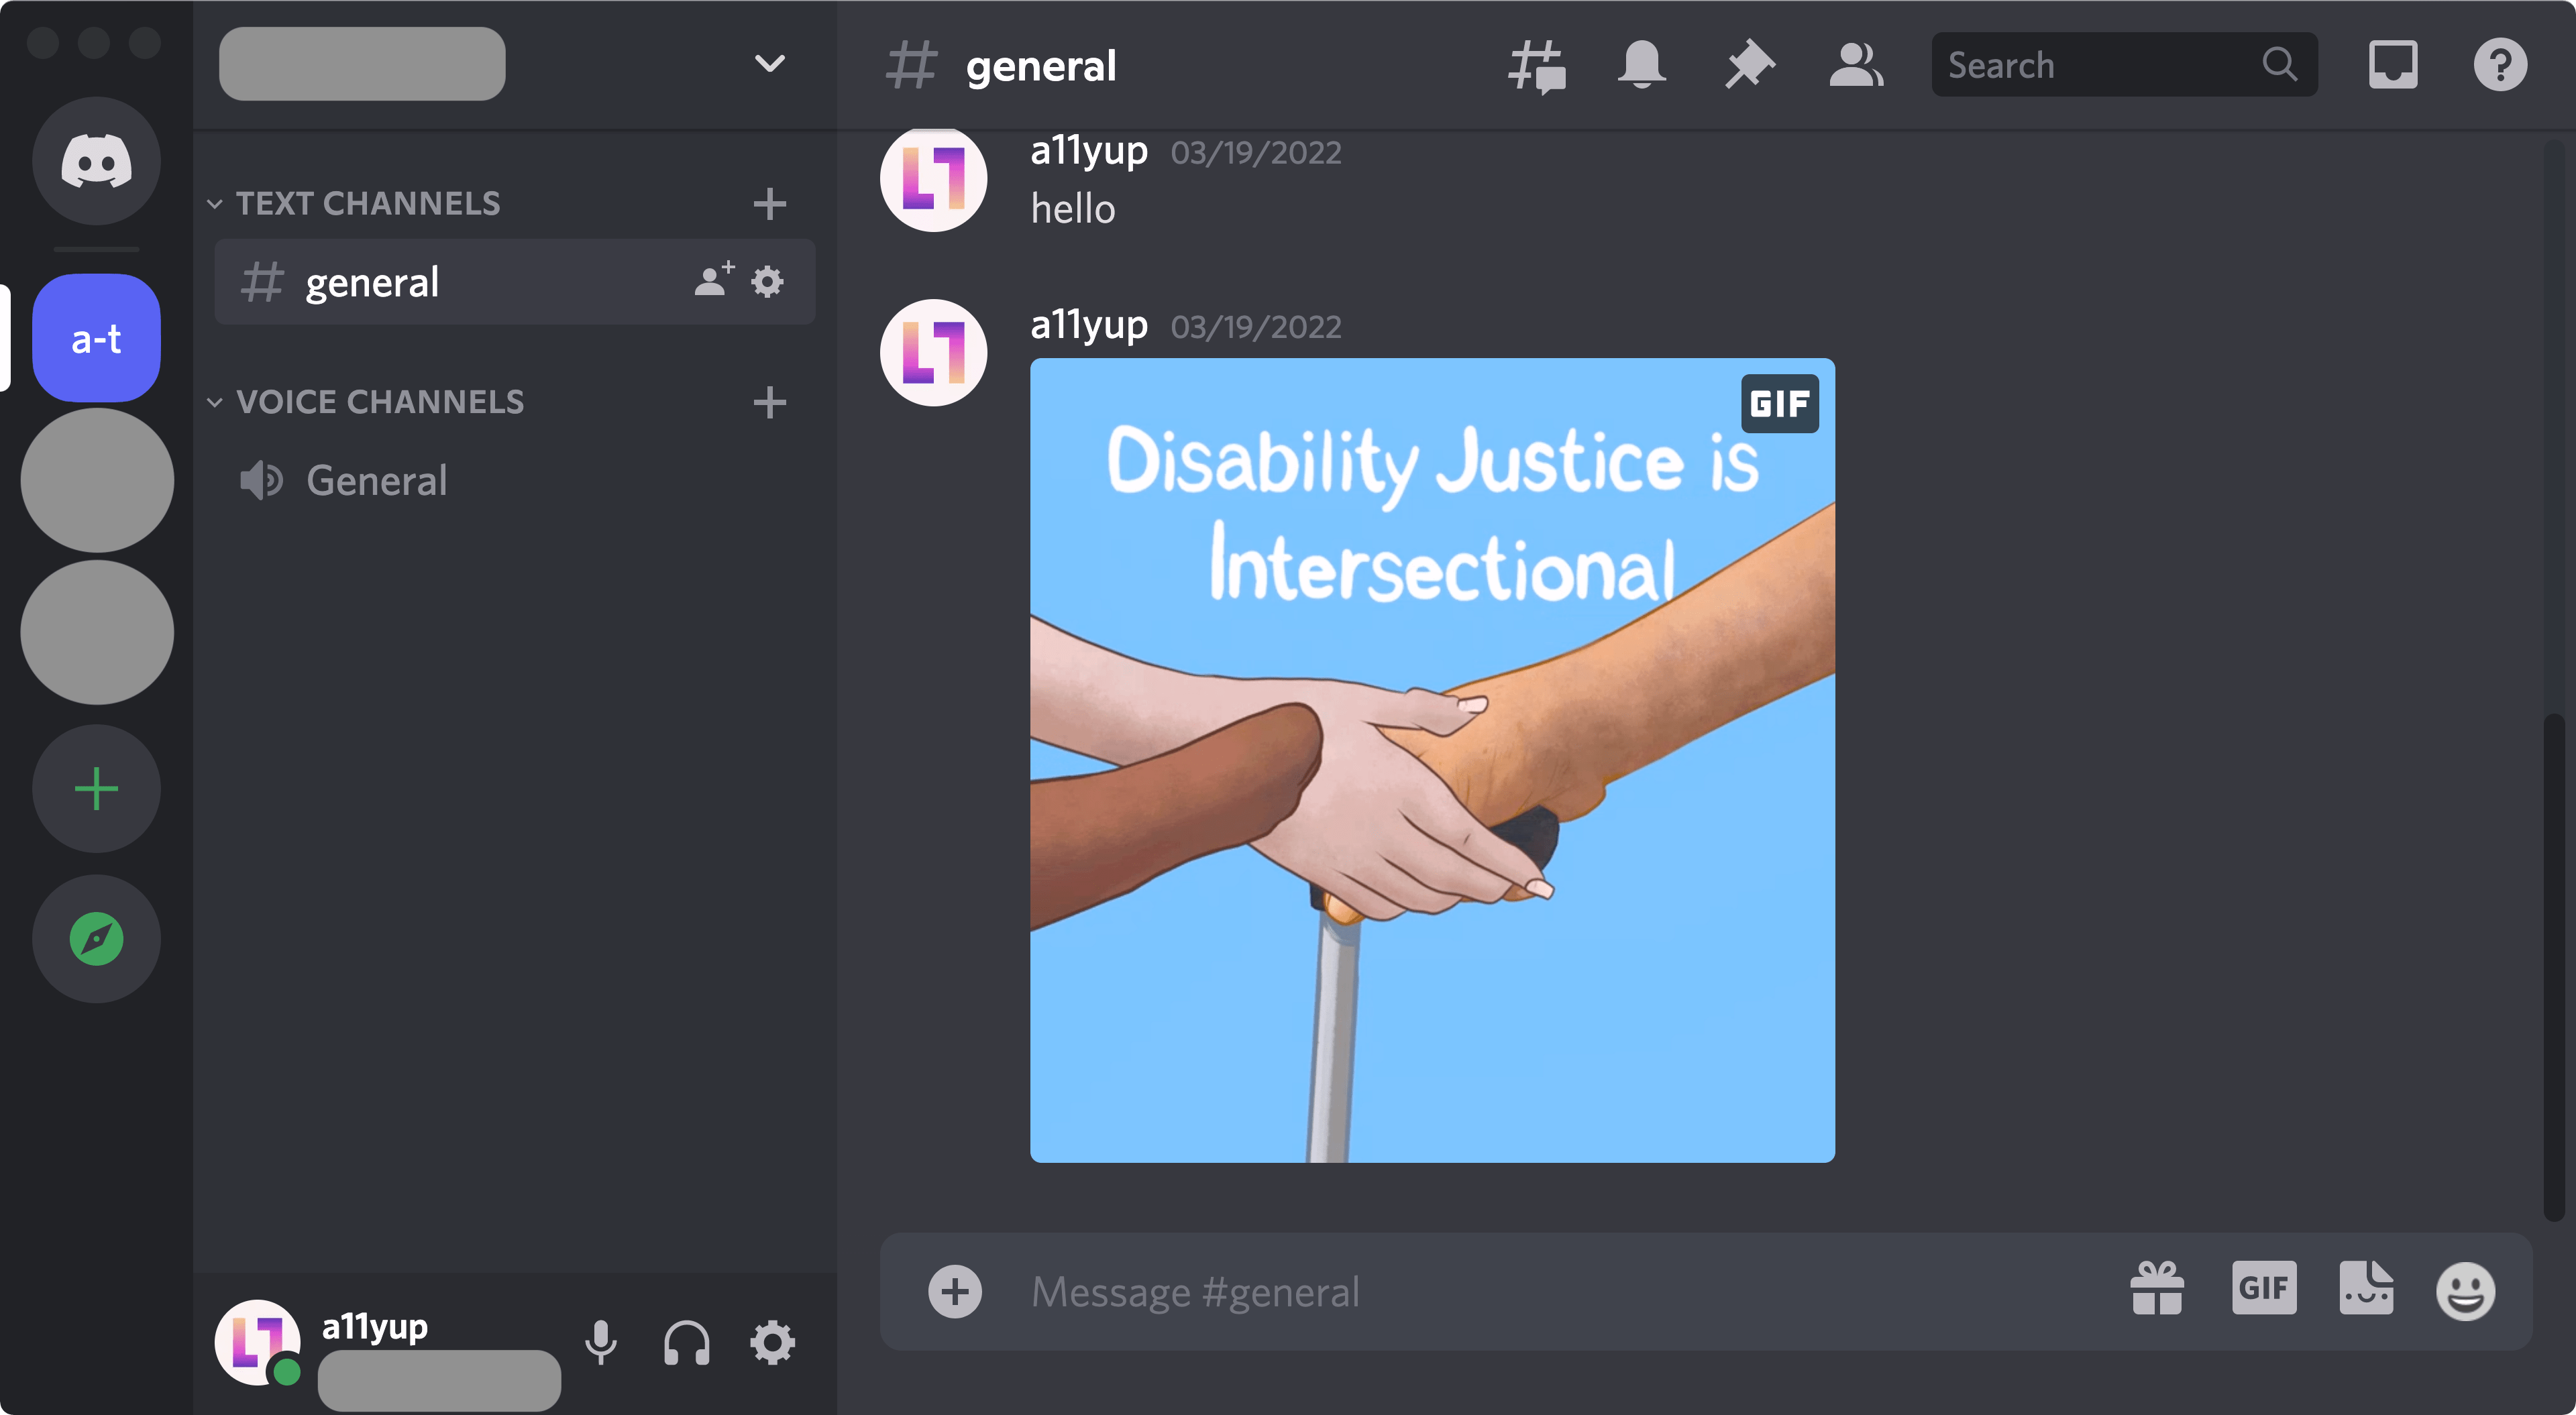 Discord's main UI at 200% zoom. Everything is still clearly readable, and nothing is cut off.